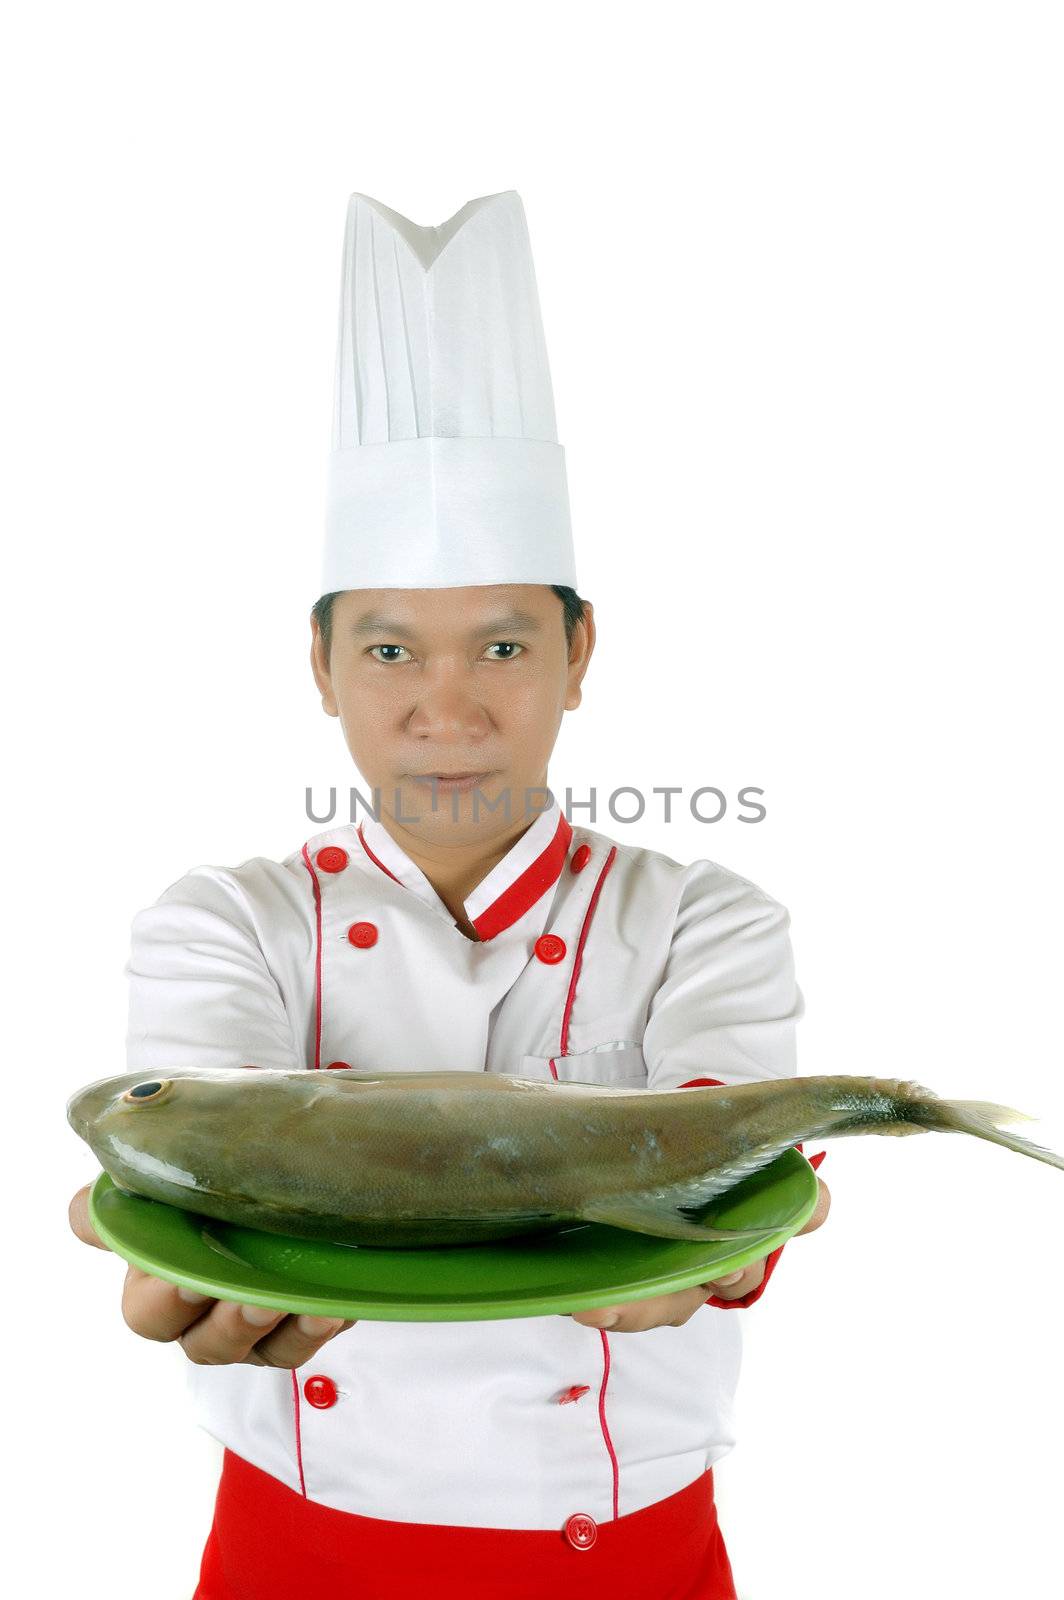 chef holding raw fish on a green plate  by antonihalim